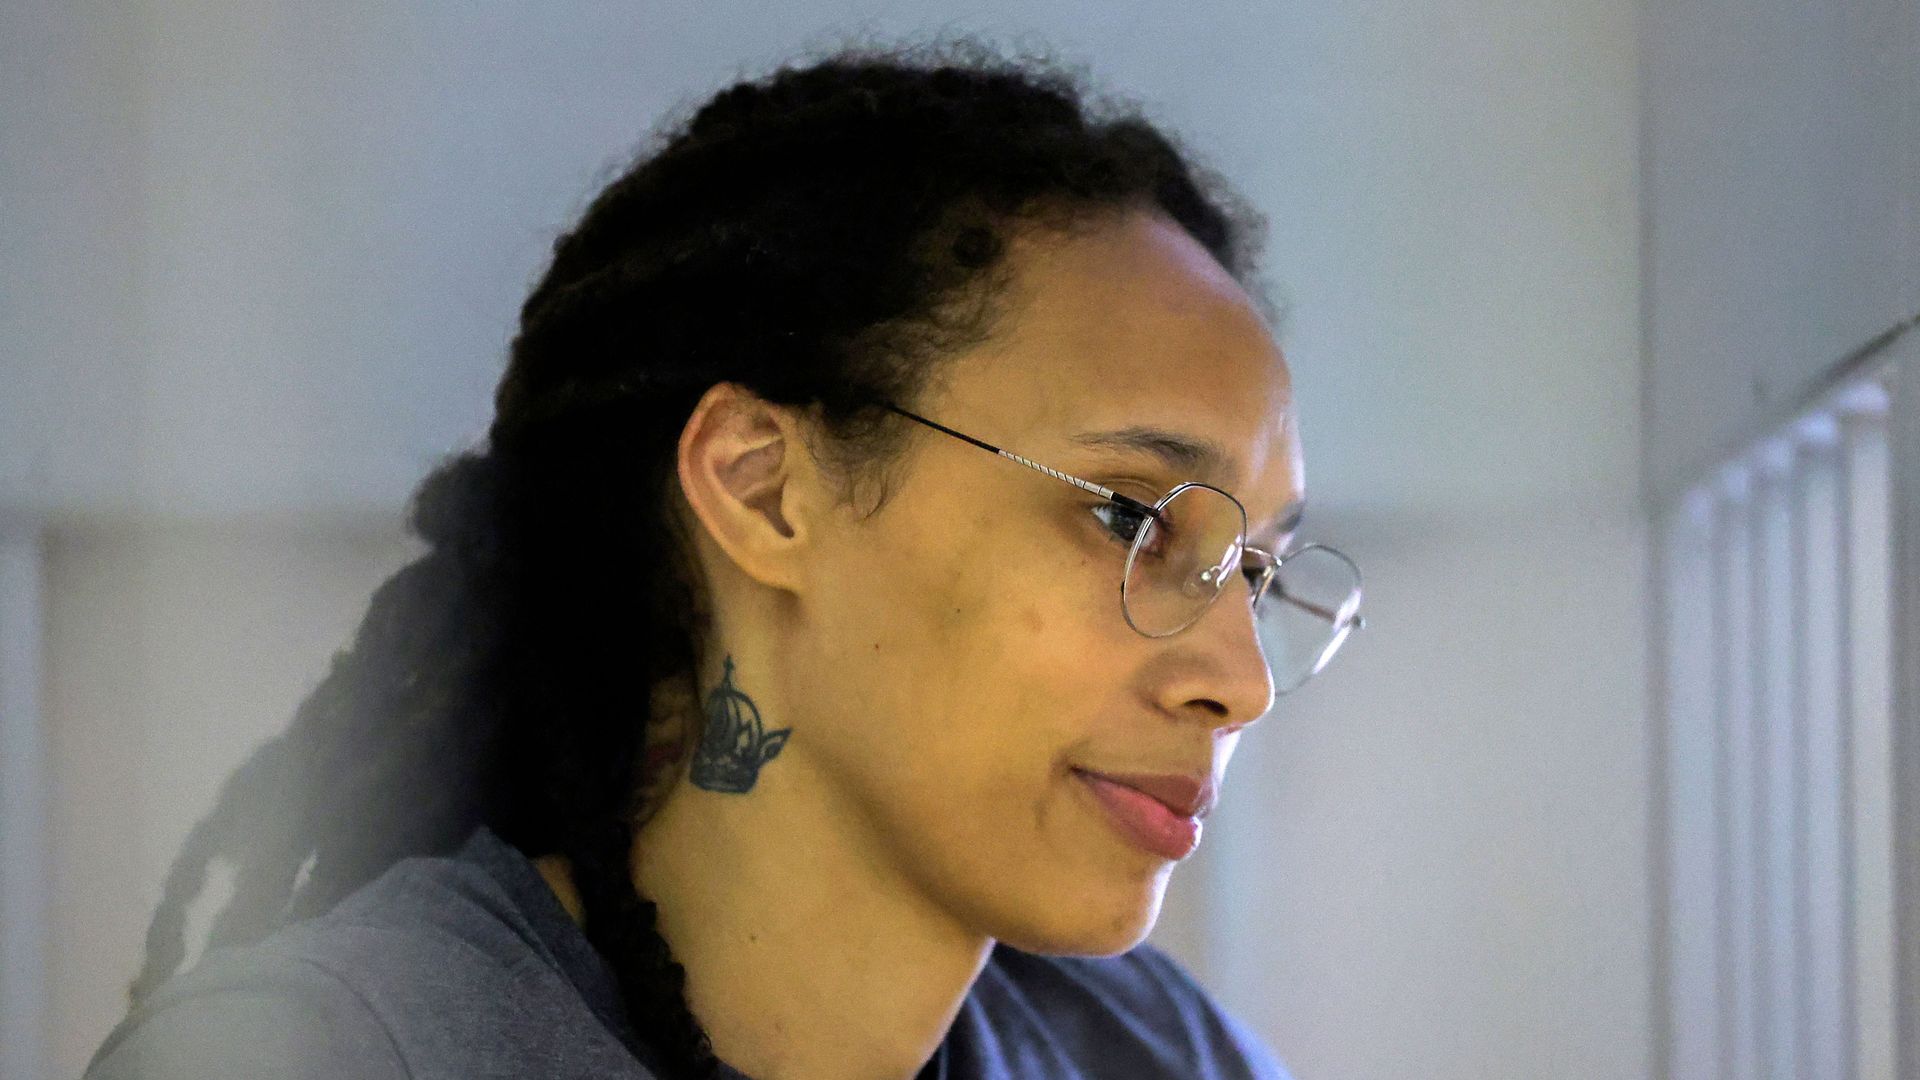 WNBA star Brittney Griner had a doctor's note for cannabis, lawyer